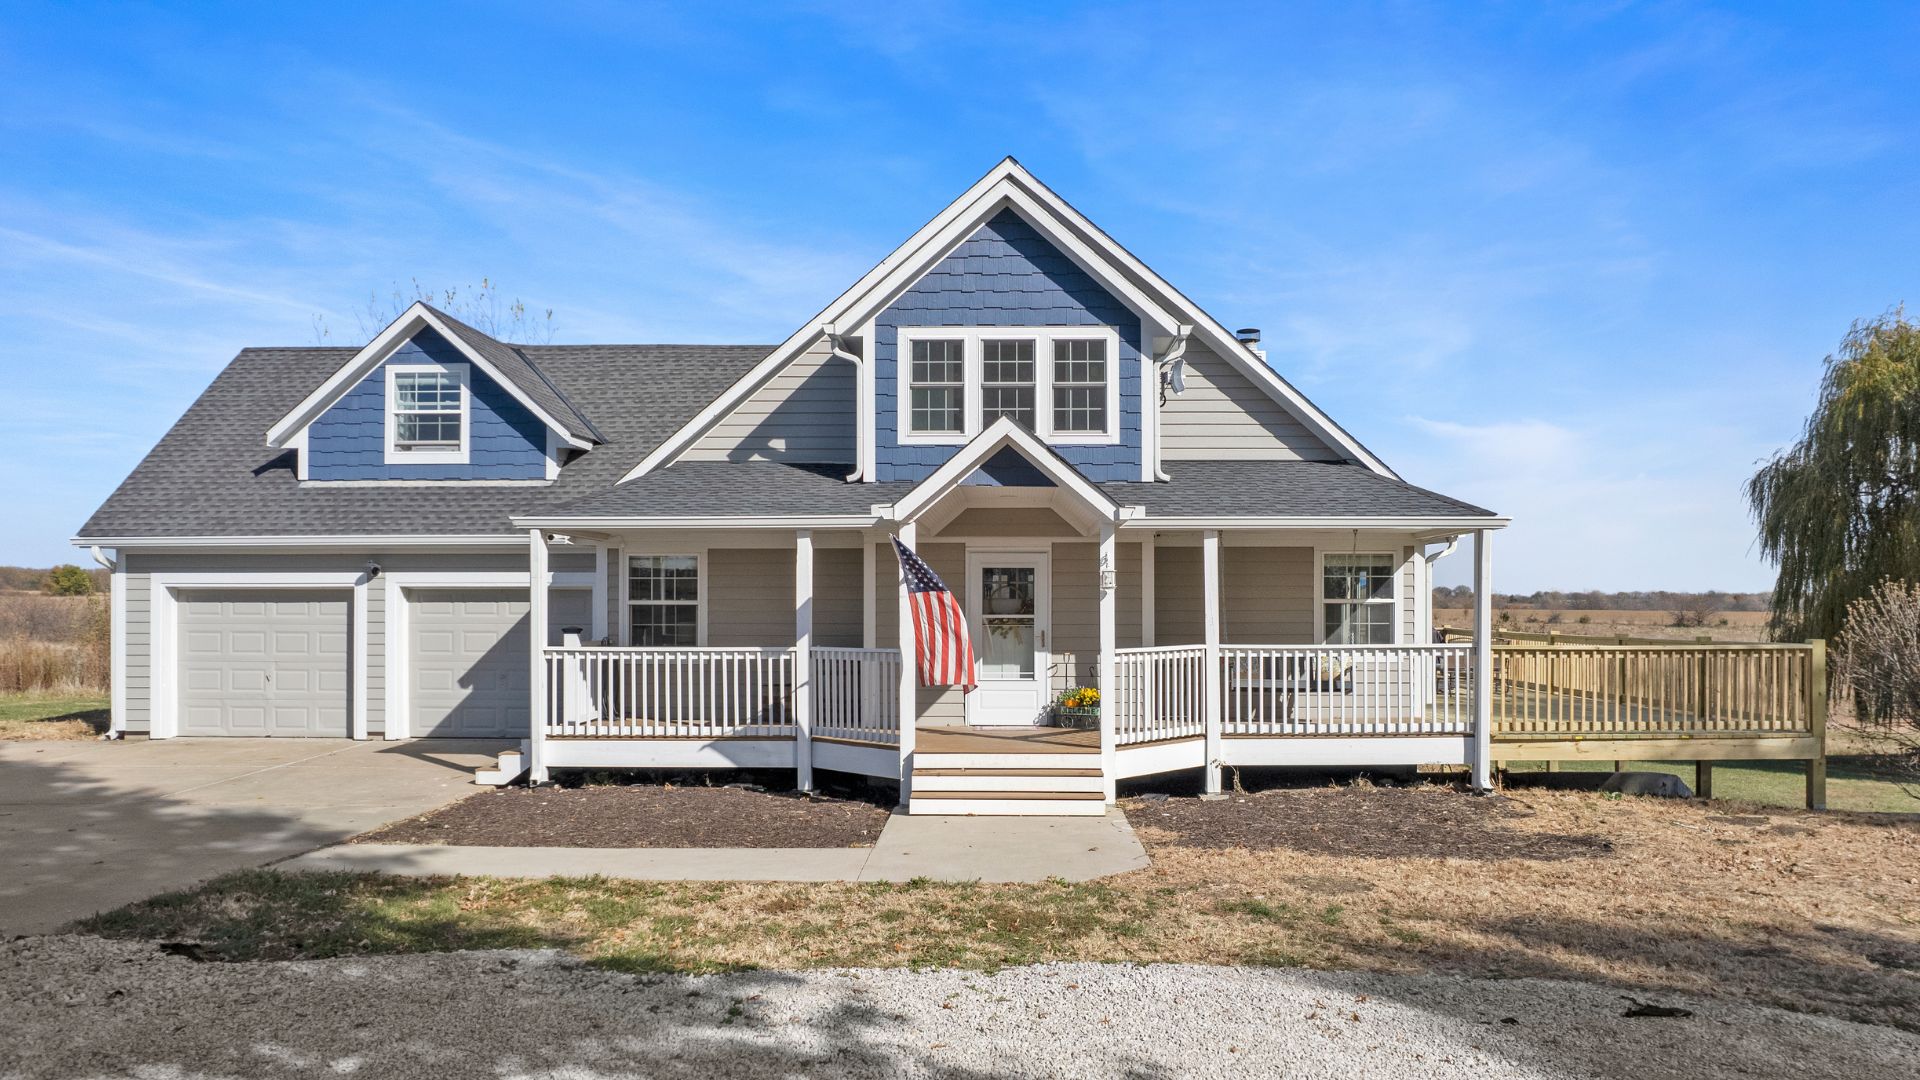 Front of home with blue paint, wrap around porch, and American Flag blowing in the wind. Gravel driveway leading up to paved driveaway.